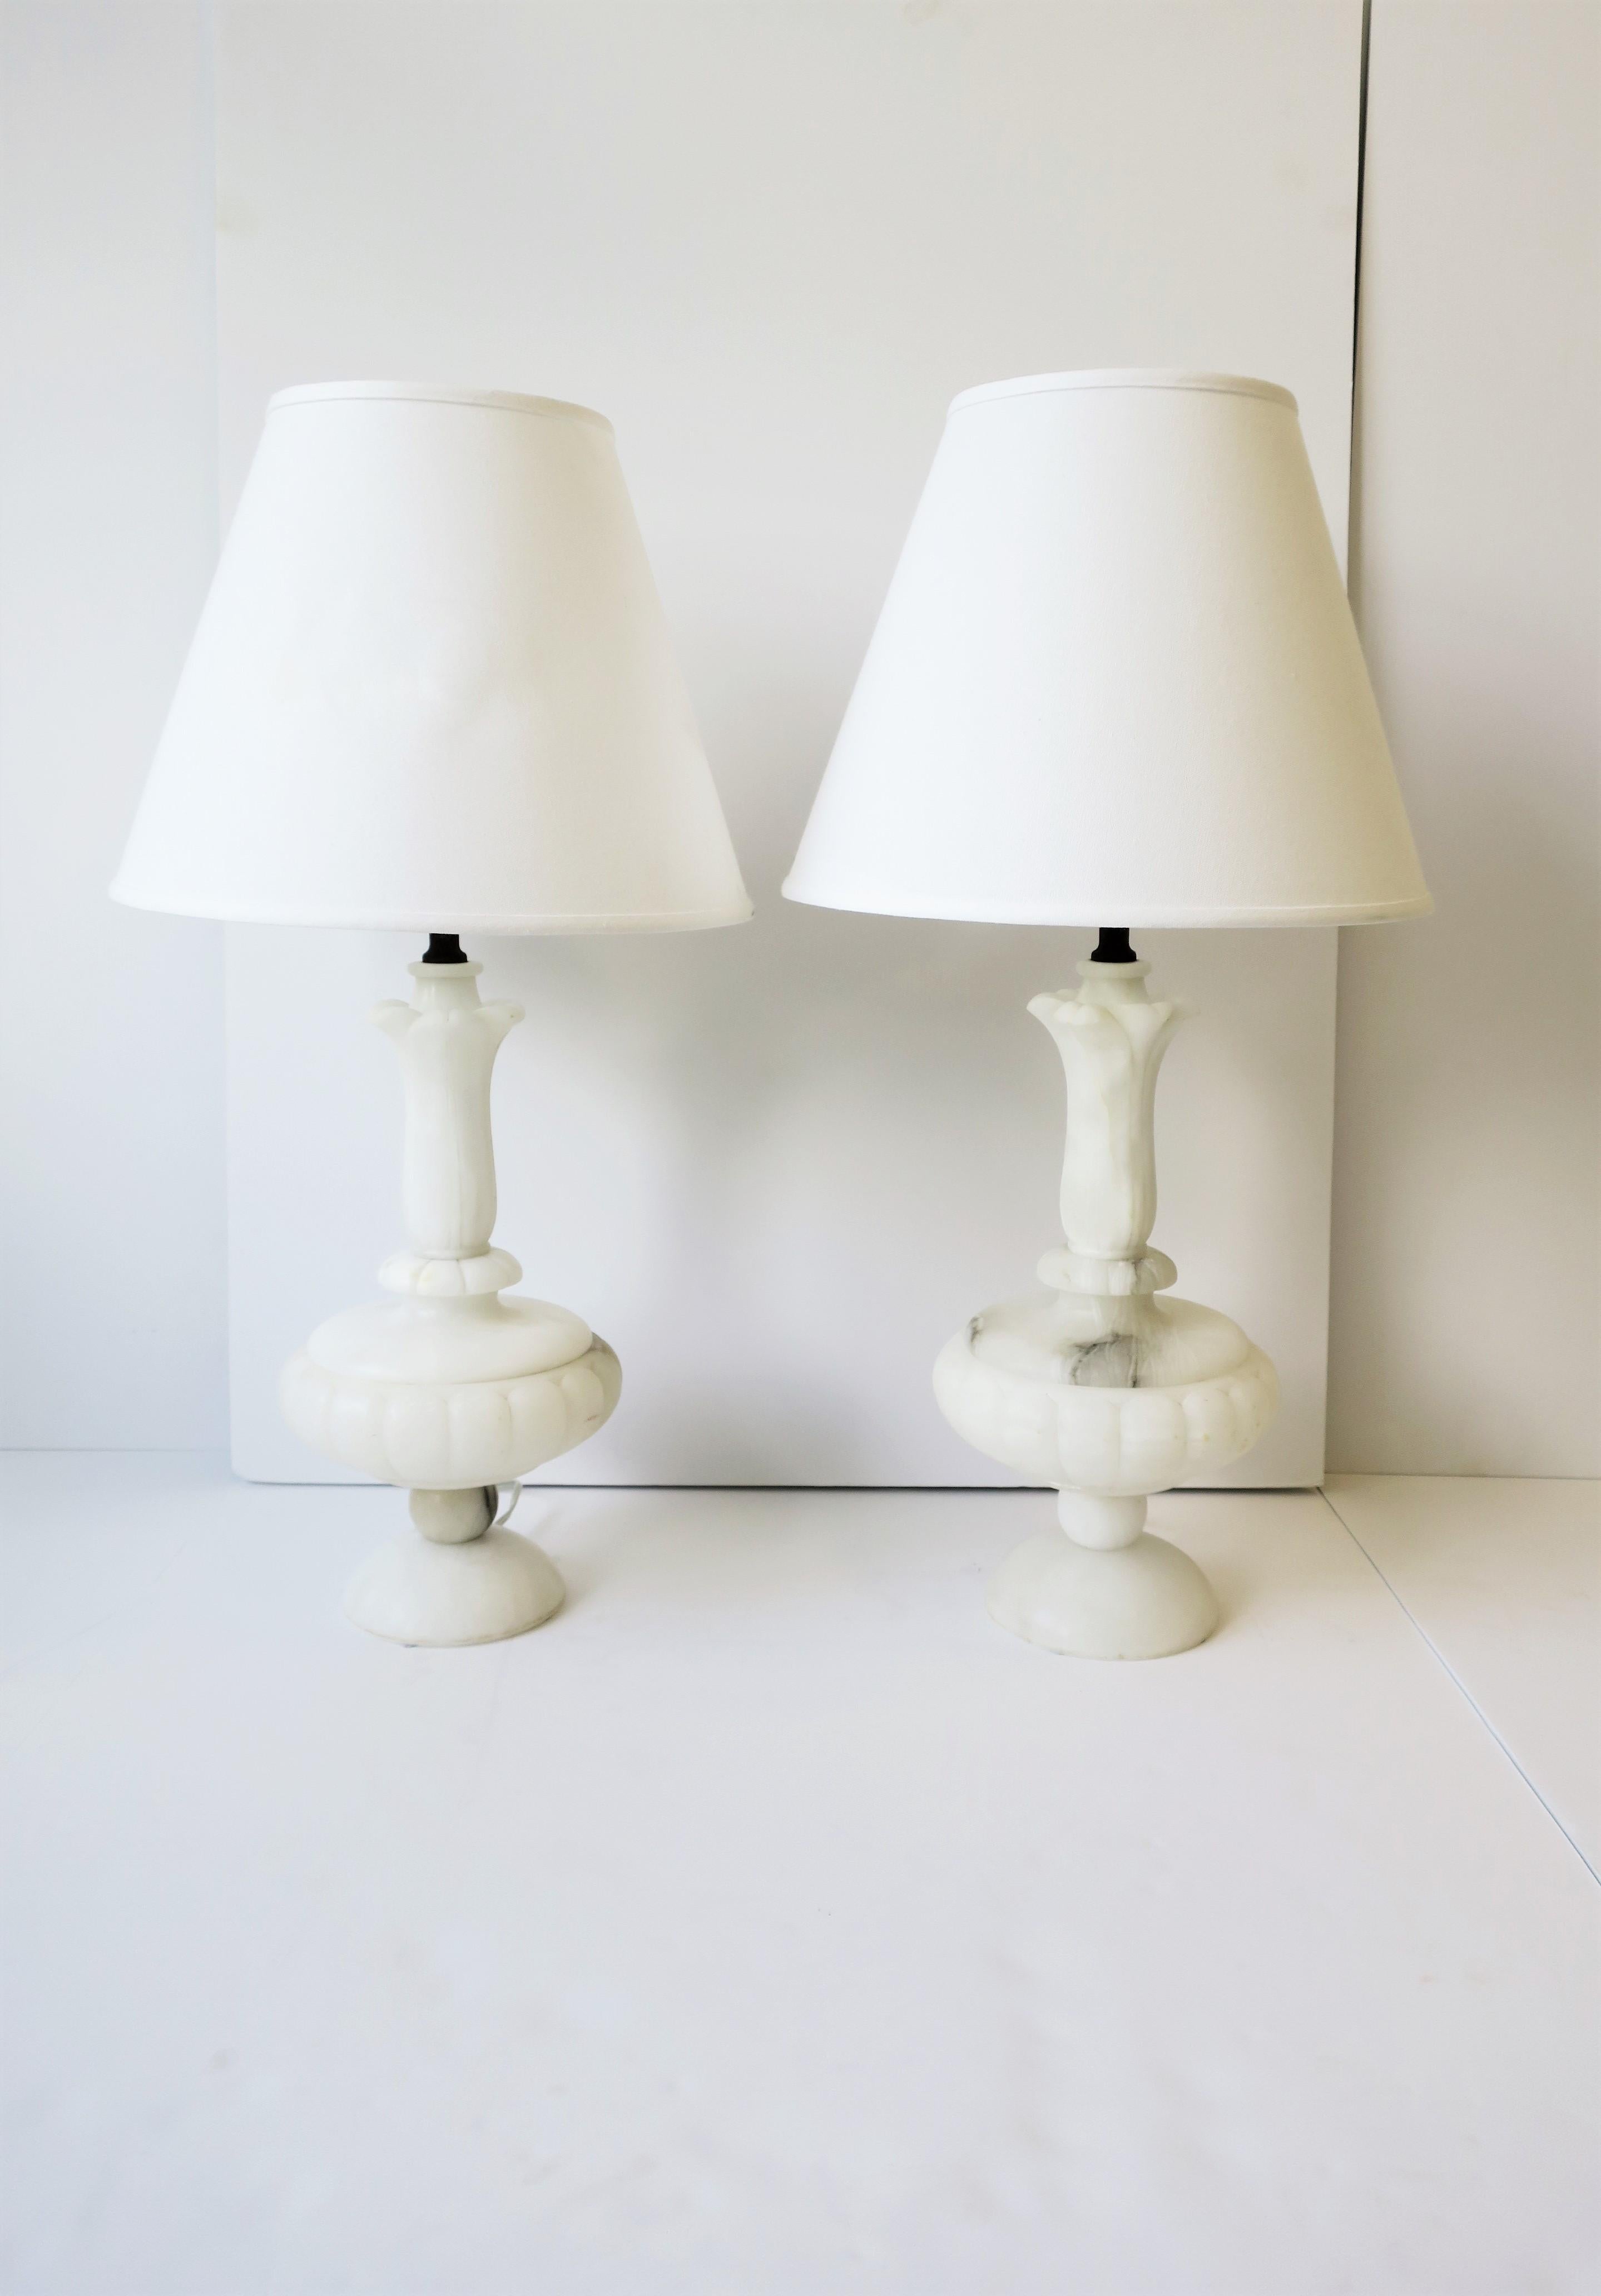 A beautiful and substantial pair of Italian white alabaster marble desk or table lamps in the neoclassical style, circa mid-20th century, Italy. Pair are predominantly white with some traces of dark gray veining. Carved detail at top neck and at